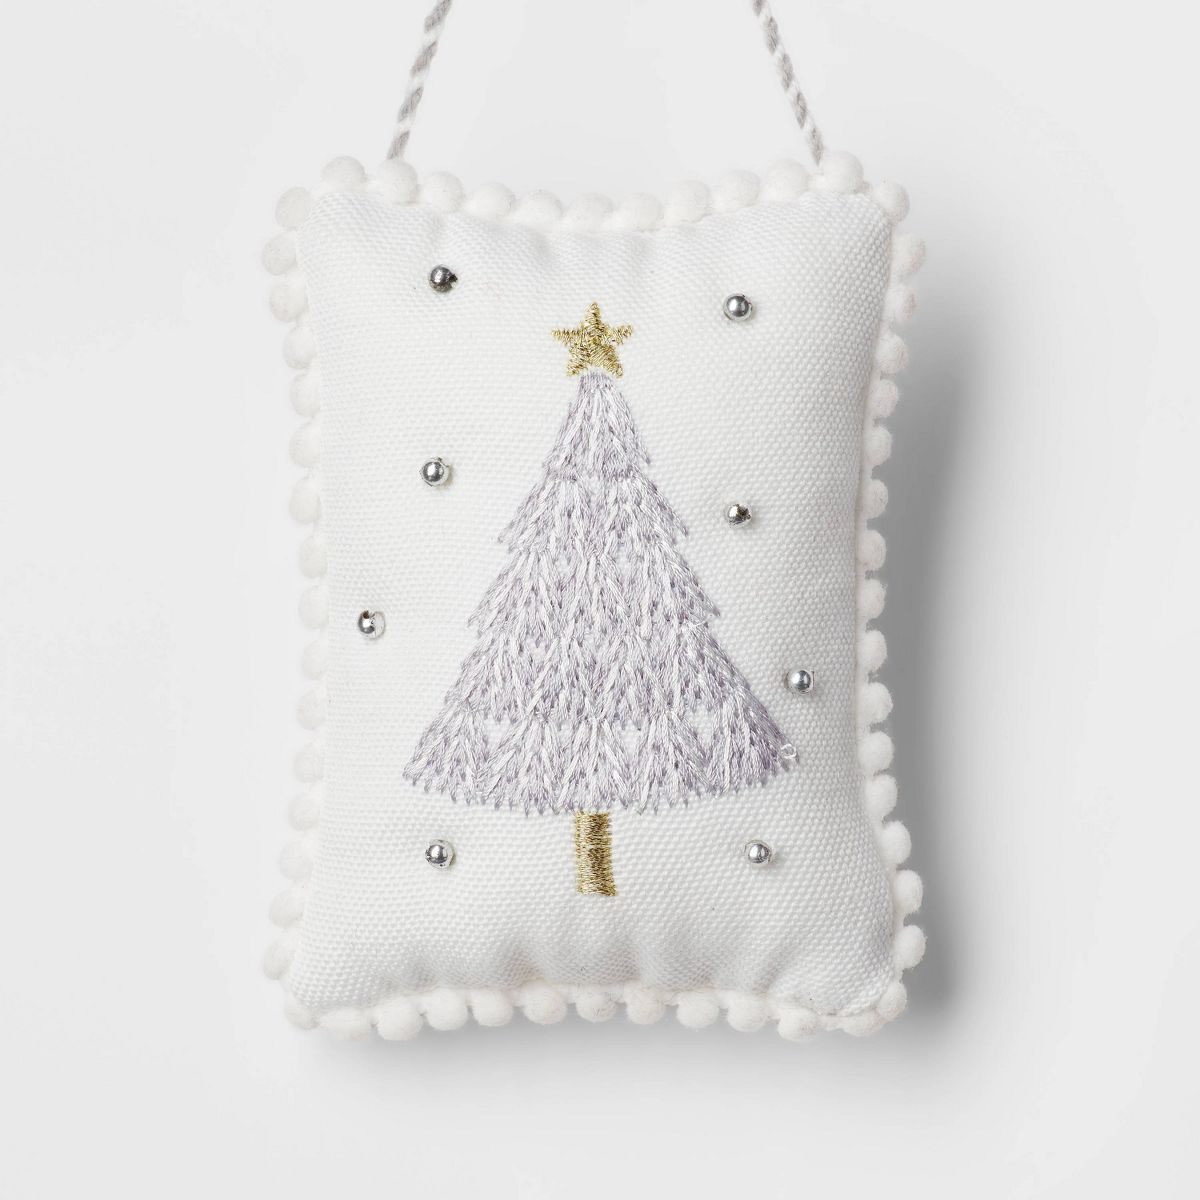 Fabric Pillow with Embroidered Tree Christmas Tree Ornament White/Gray - Wondershop™ | Target